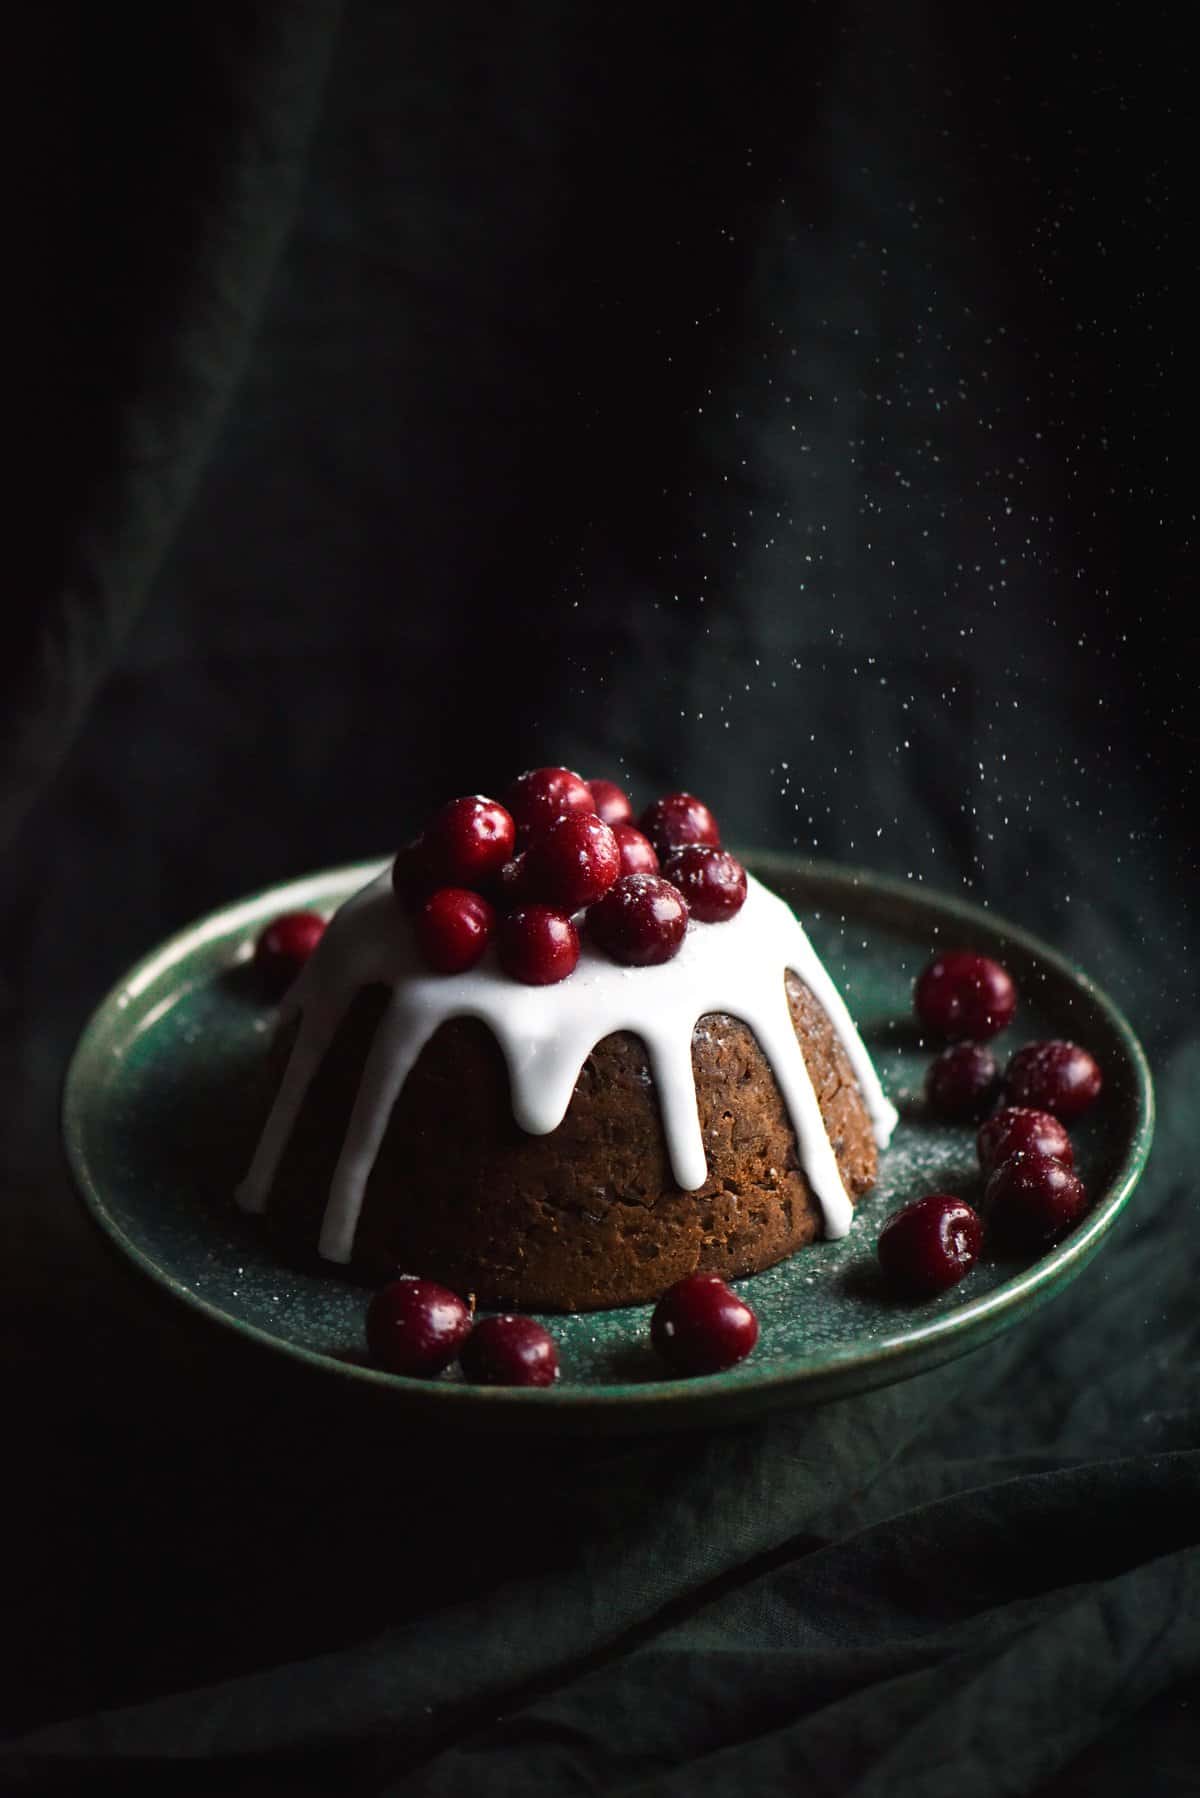 A side on photo of a fruitless, gluten free Christmas pudding, adorned with a white icing and topped with cherries